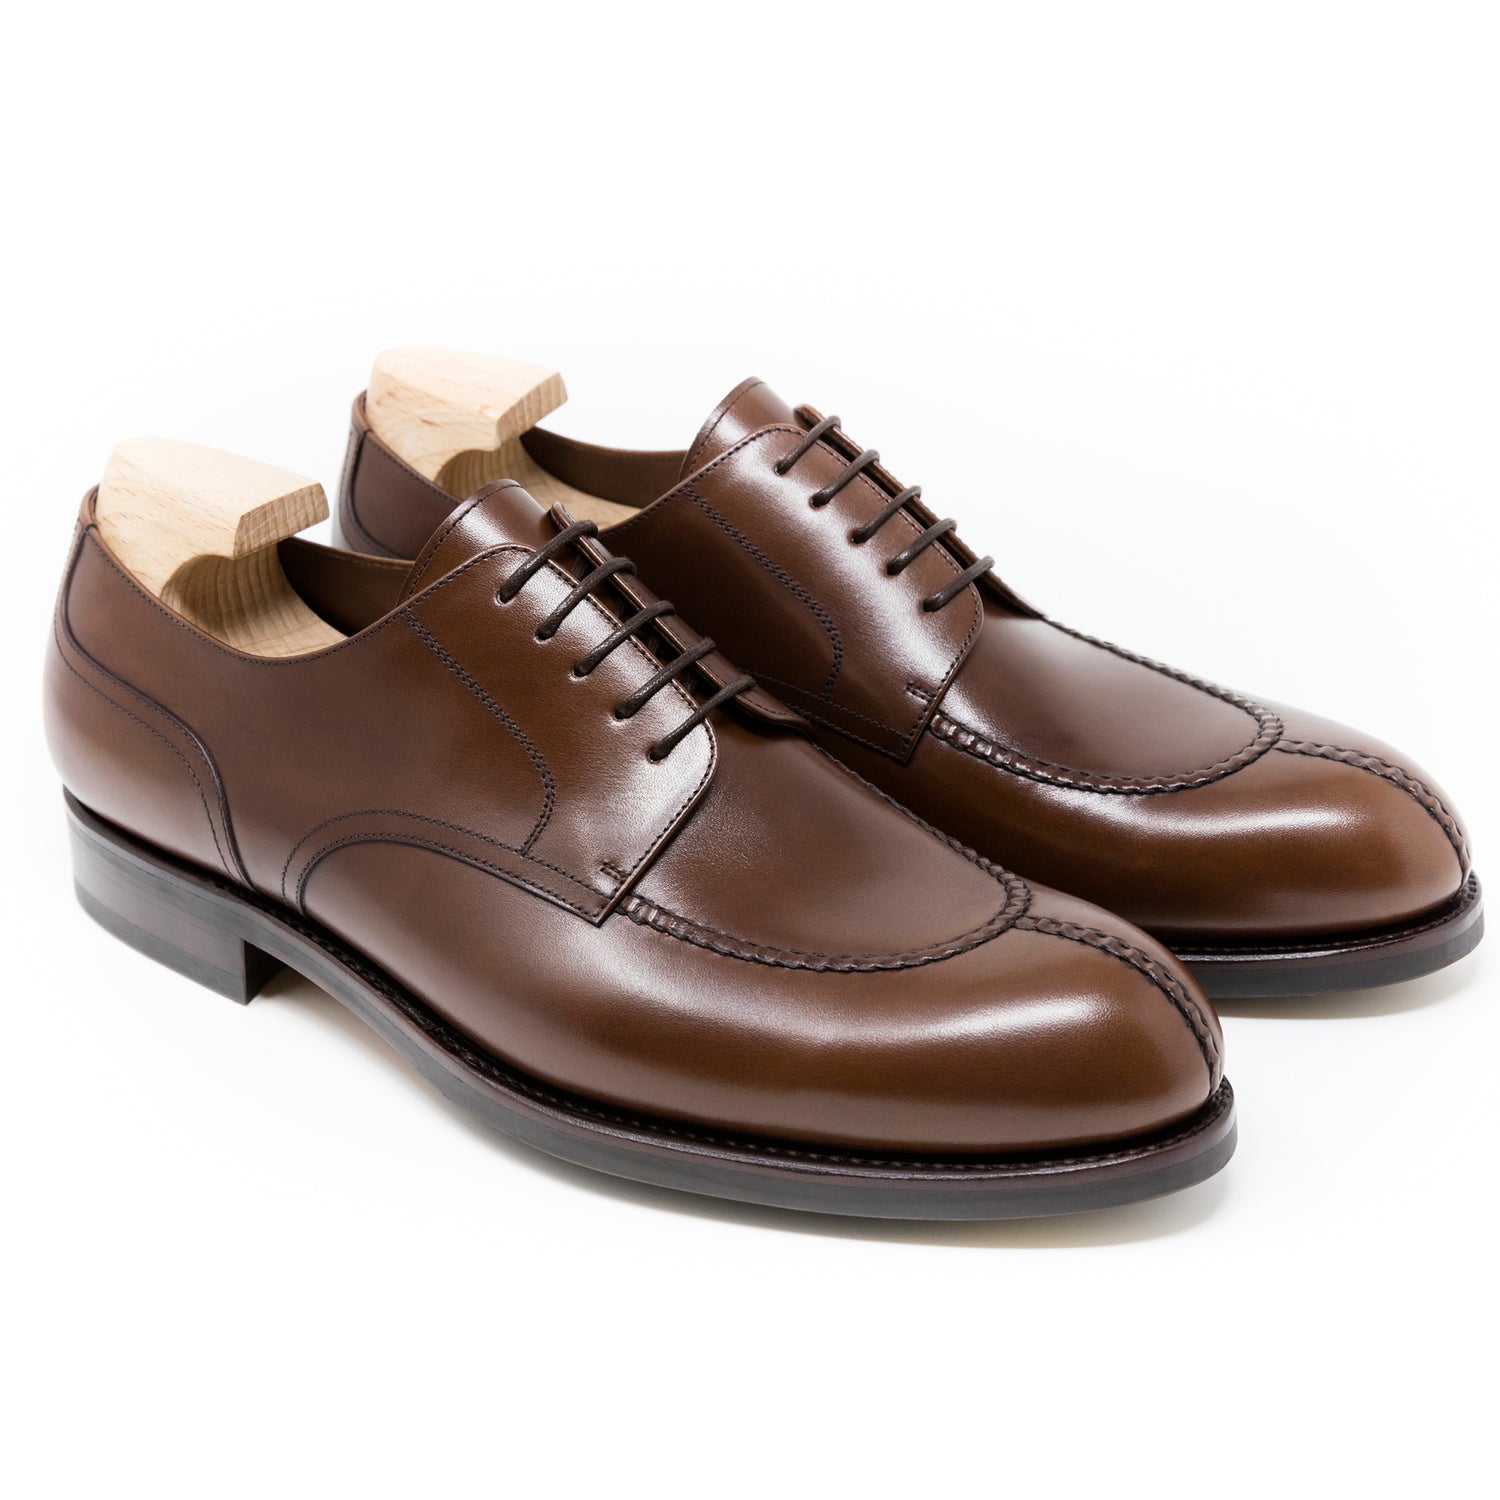 TLB Mallorca leather shoes 534 / HOWARD / VEGANO BROWN